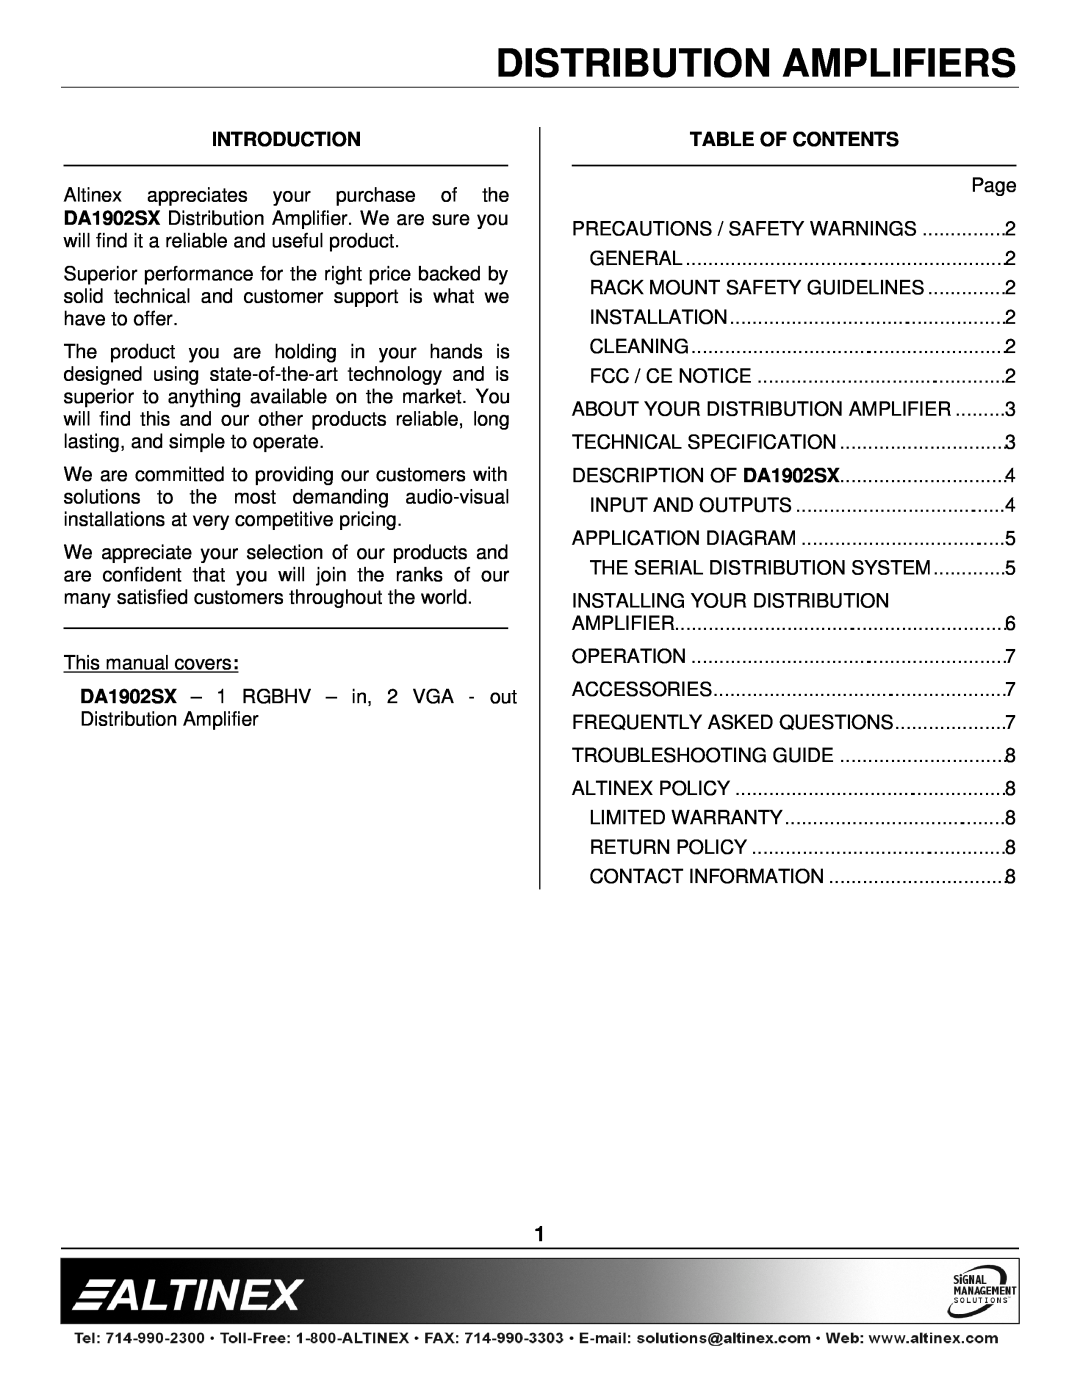 Altinex DA1902SX manual Introduction, Table Of Contents, Distribution Amplifiers 